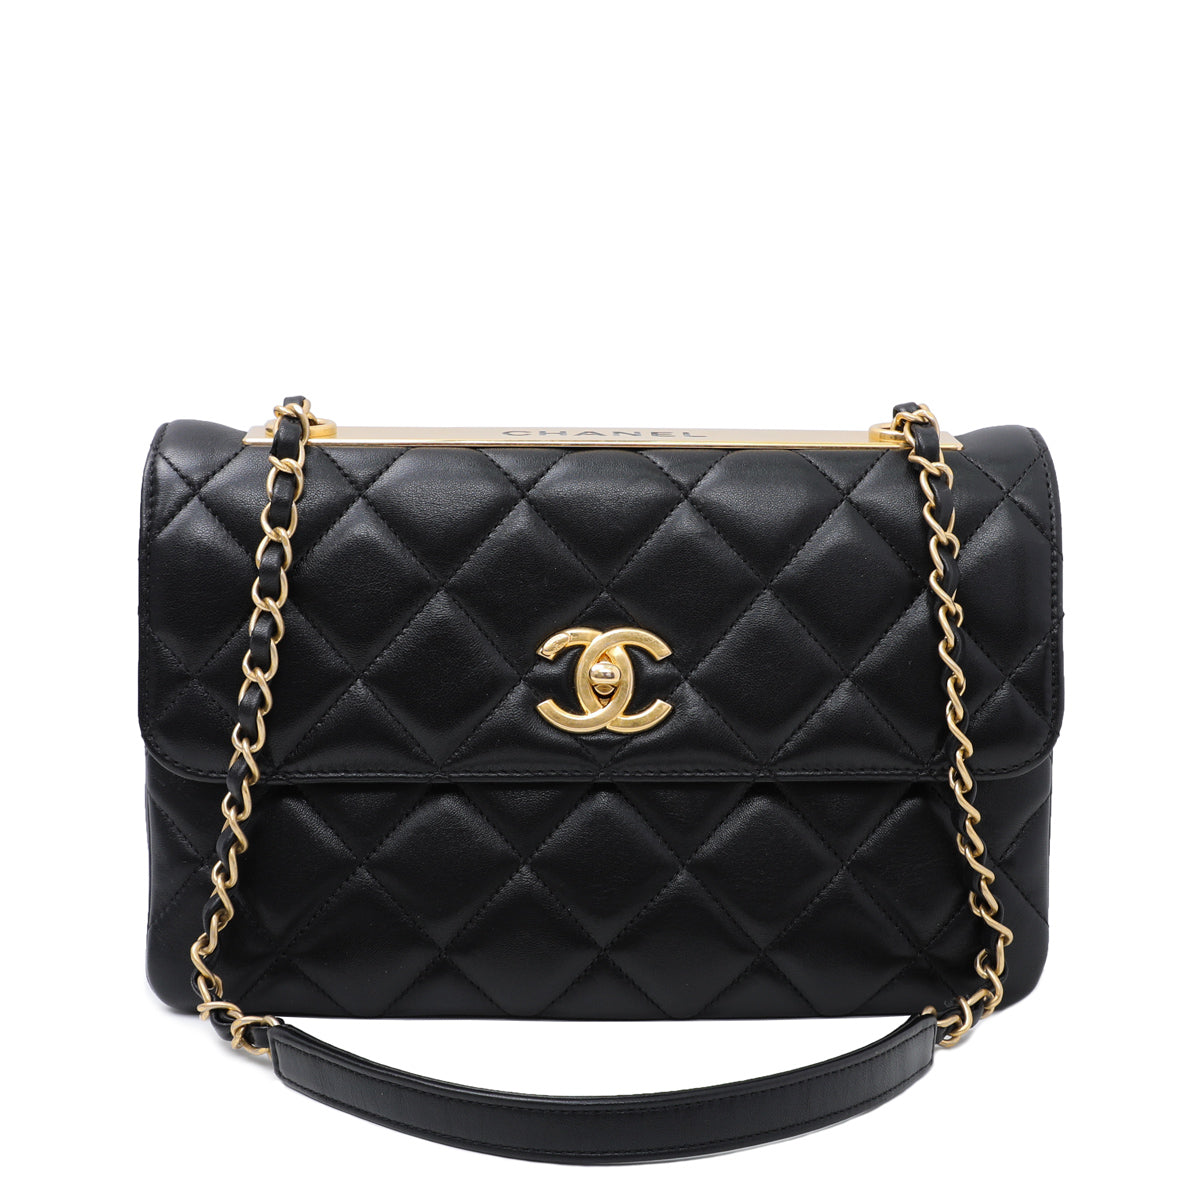 Chanel Small Enamel CC Flap Bag Quilted Grey  Dark Navy Lambskin  Coco  Approved Studio